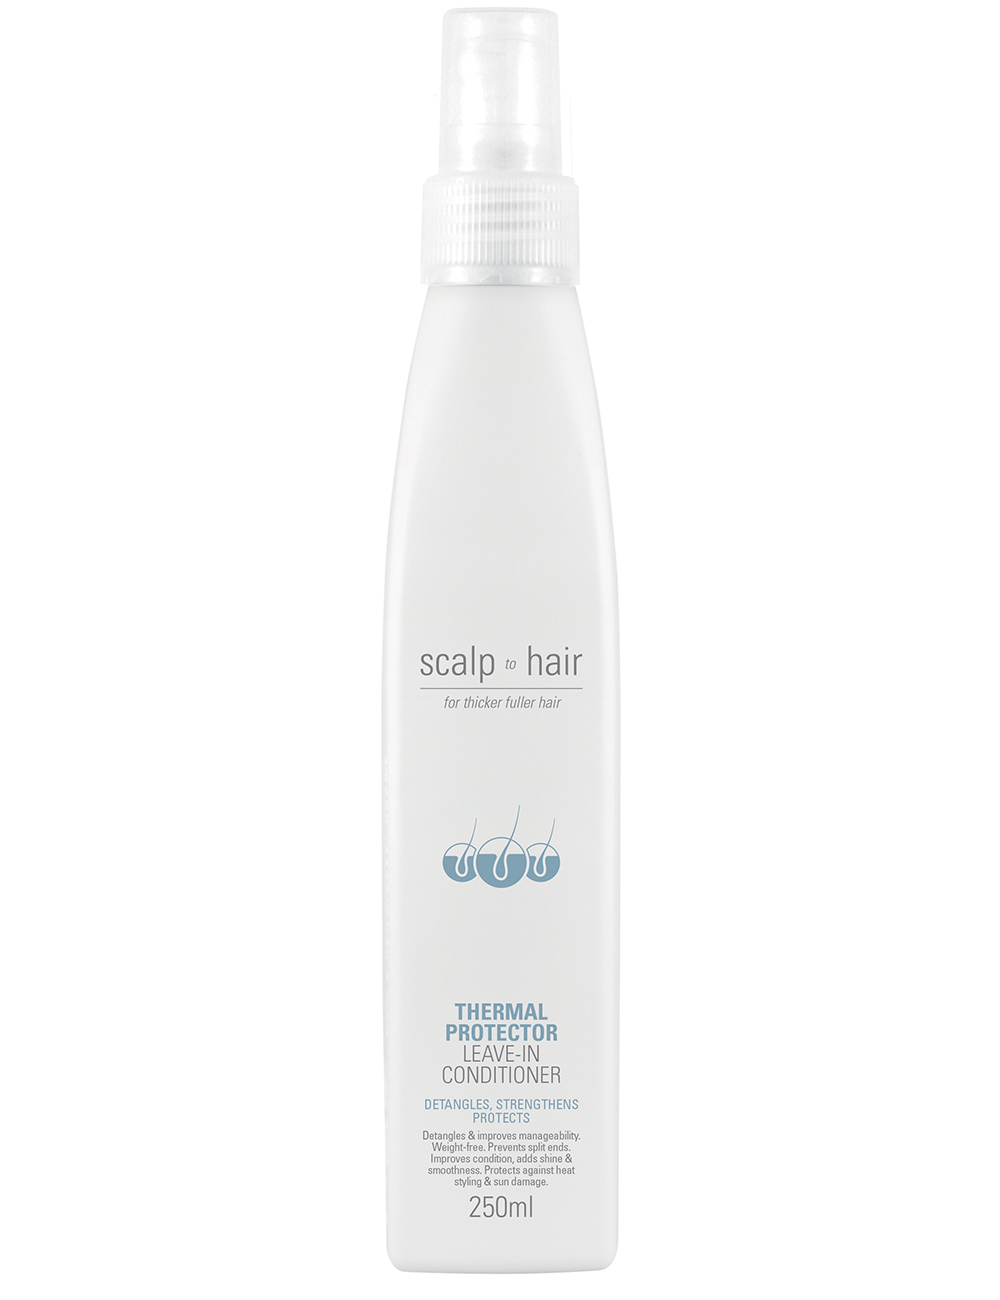 Nak Hair Scalp To Hair Thermal Protector 250ml Leave In Conditioner